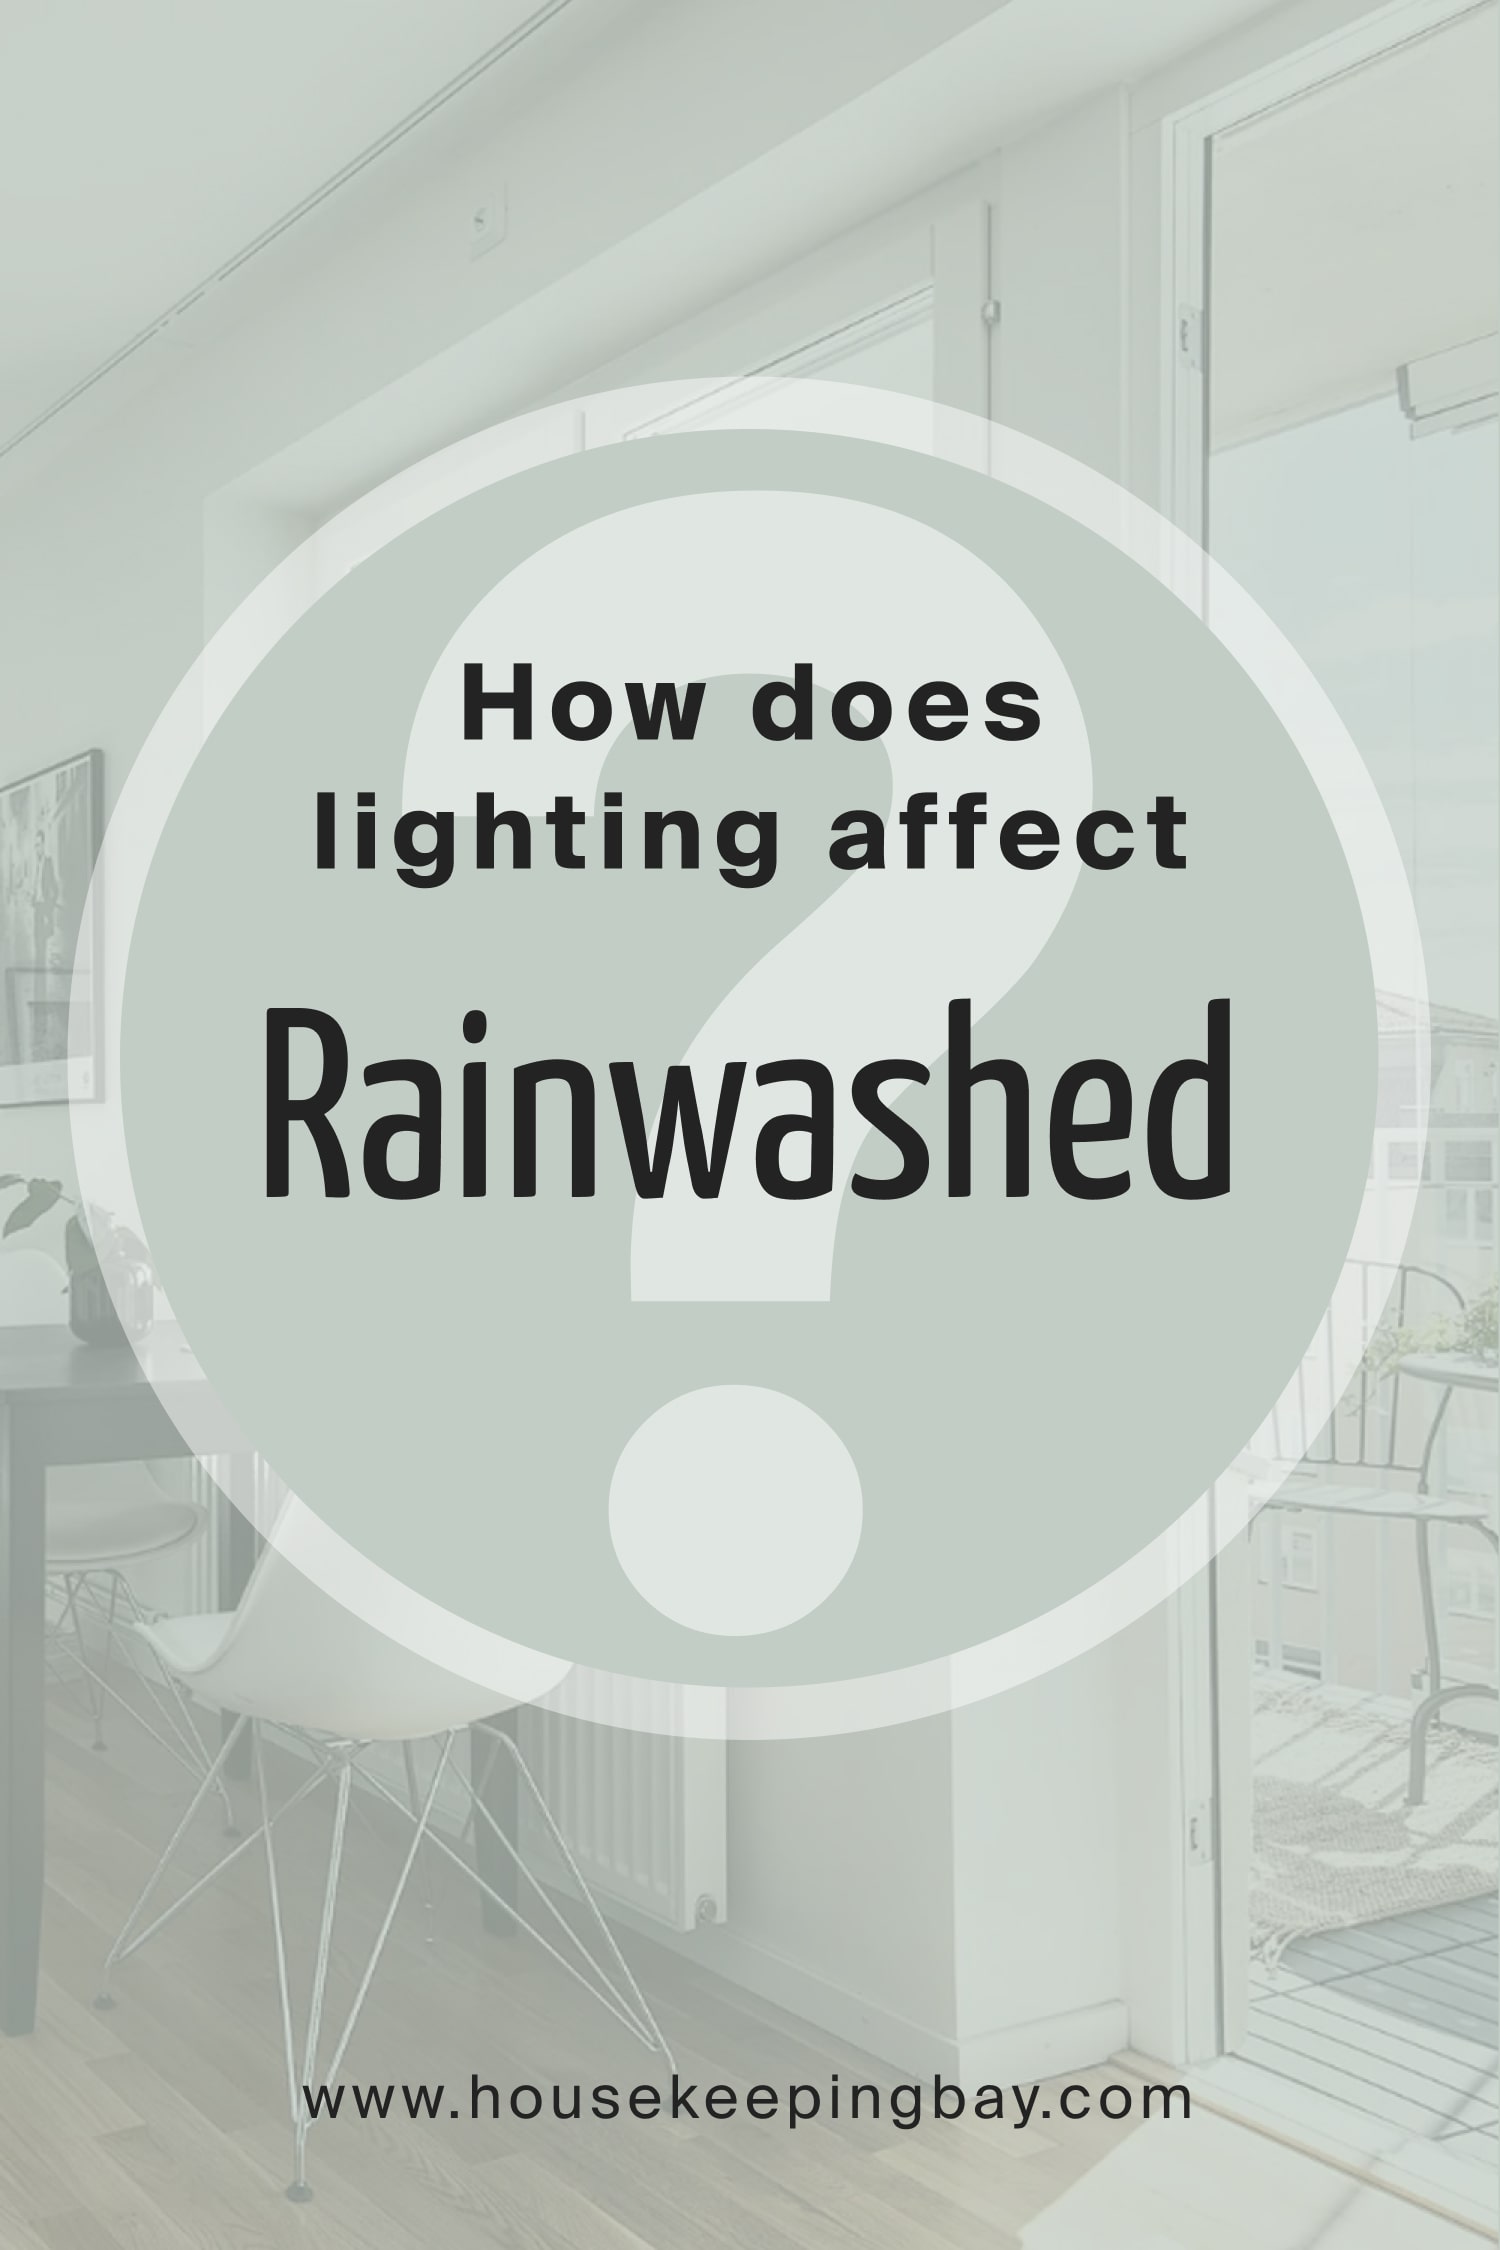 How does lighting affect Rainwashed